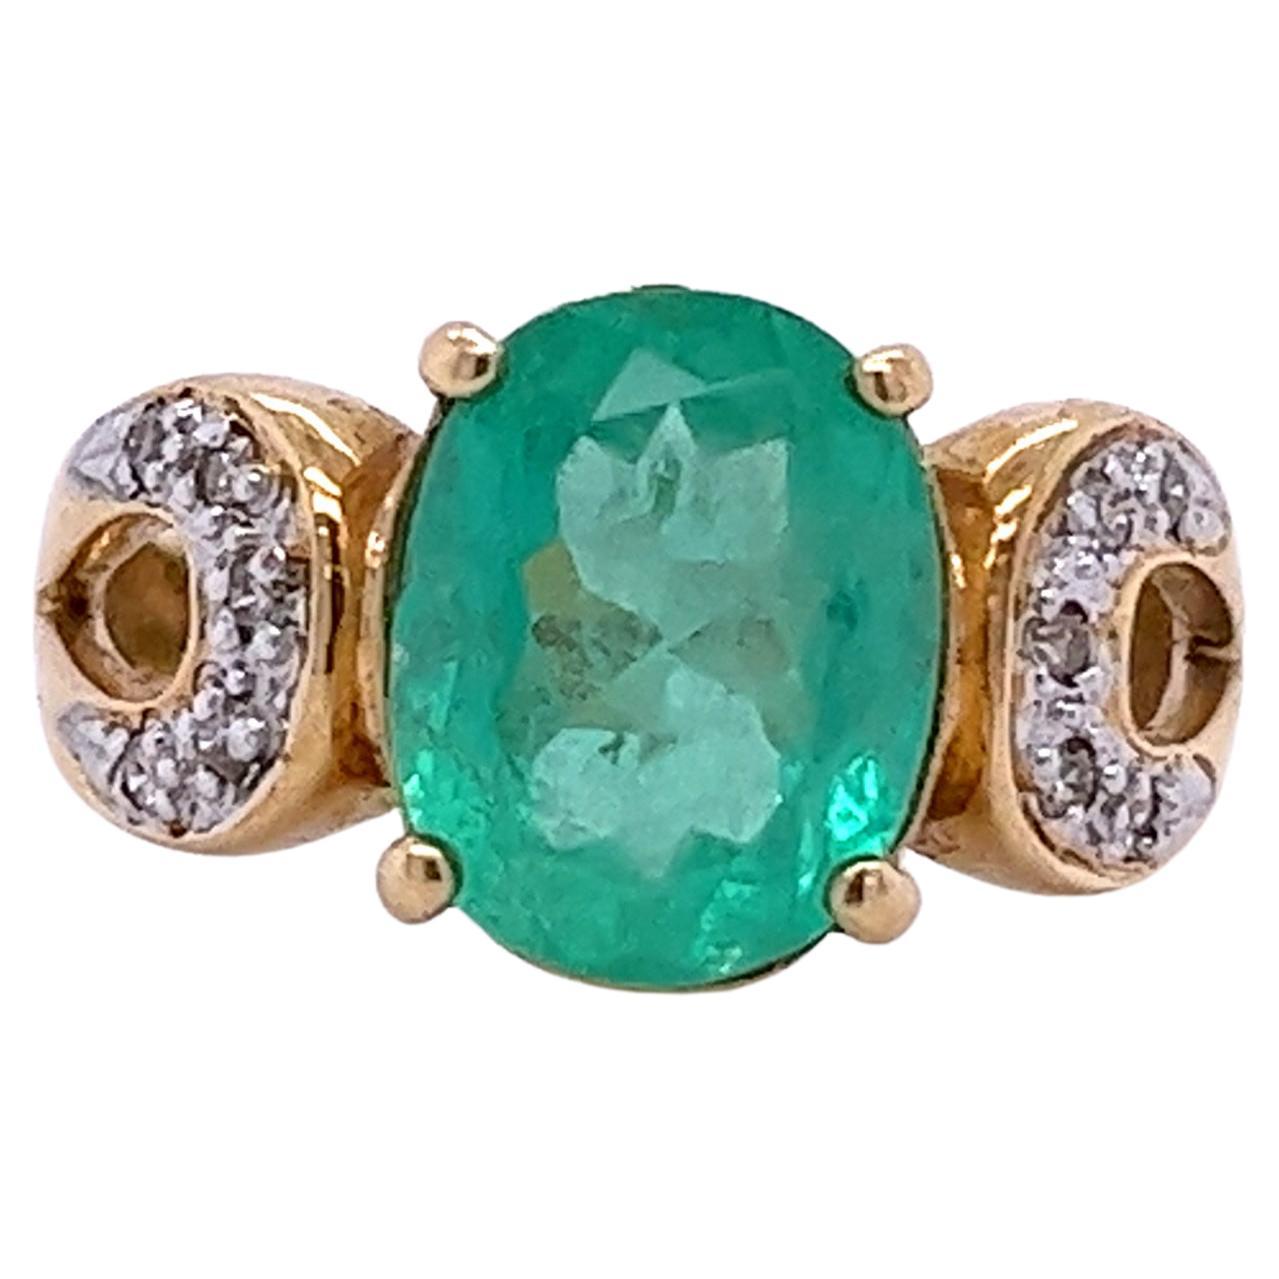 3 carat Oval Cut Colombian Emerald and Diamond Vintage Ring in 14k Yellow Gold For Sale